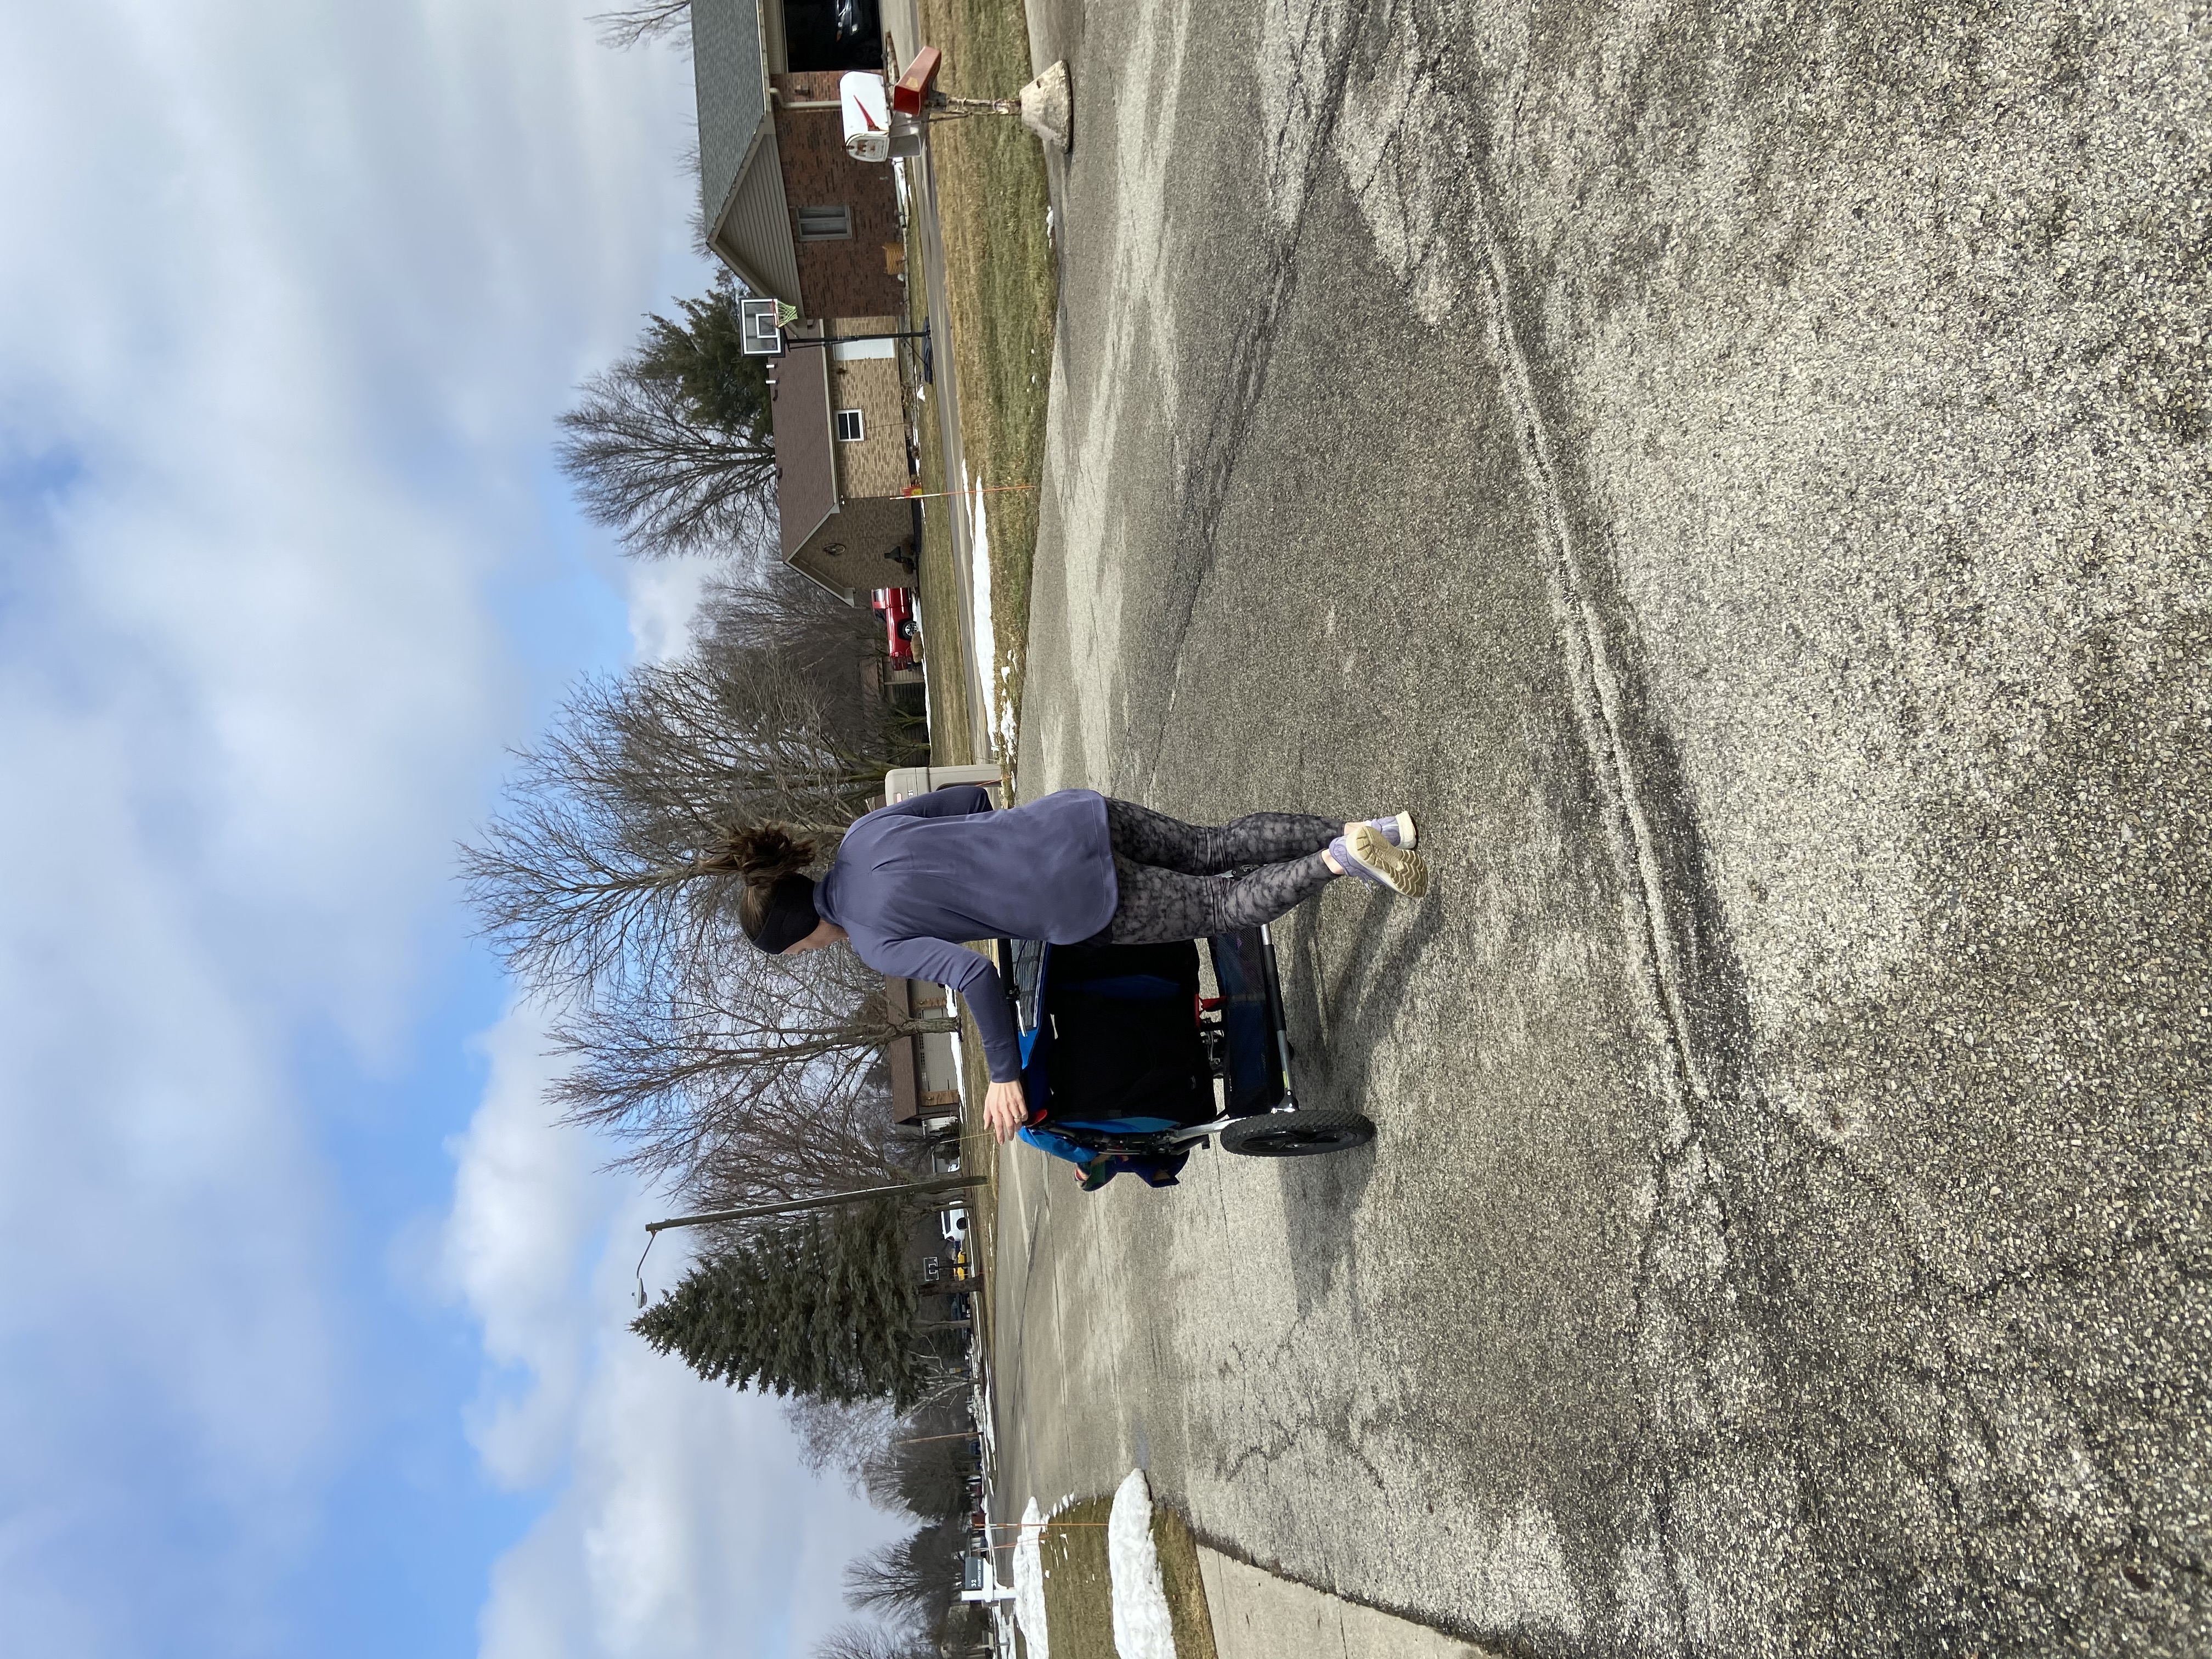 Running with my Bob Duallie. A jogging stroller is a great addition to a runner's care package or runner's gift!